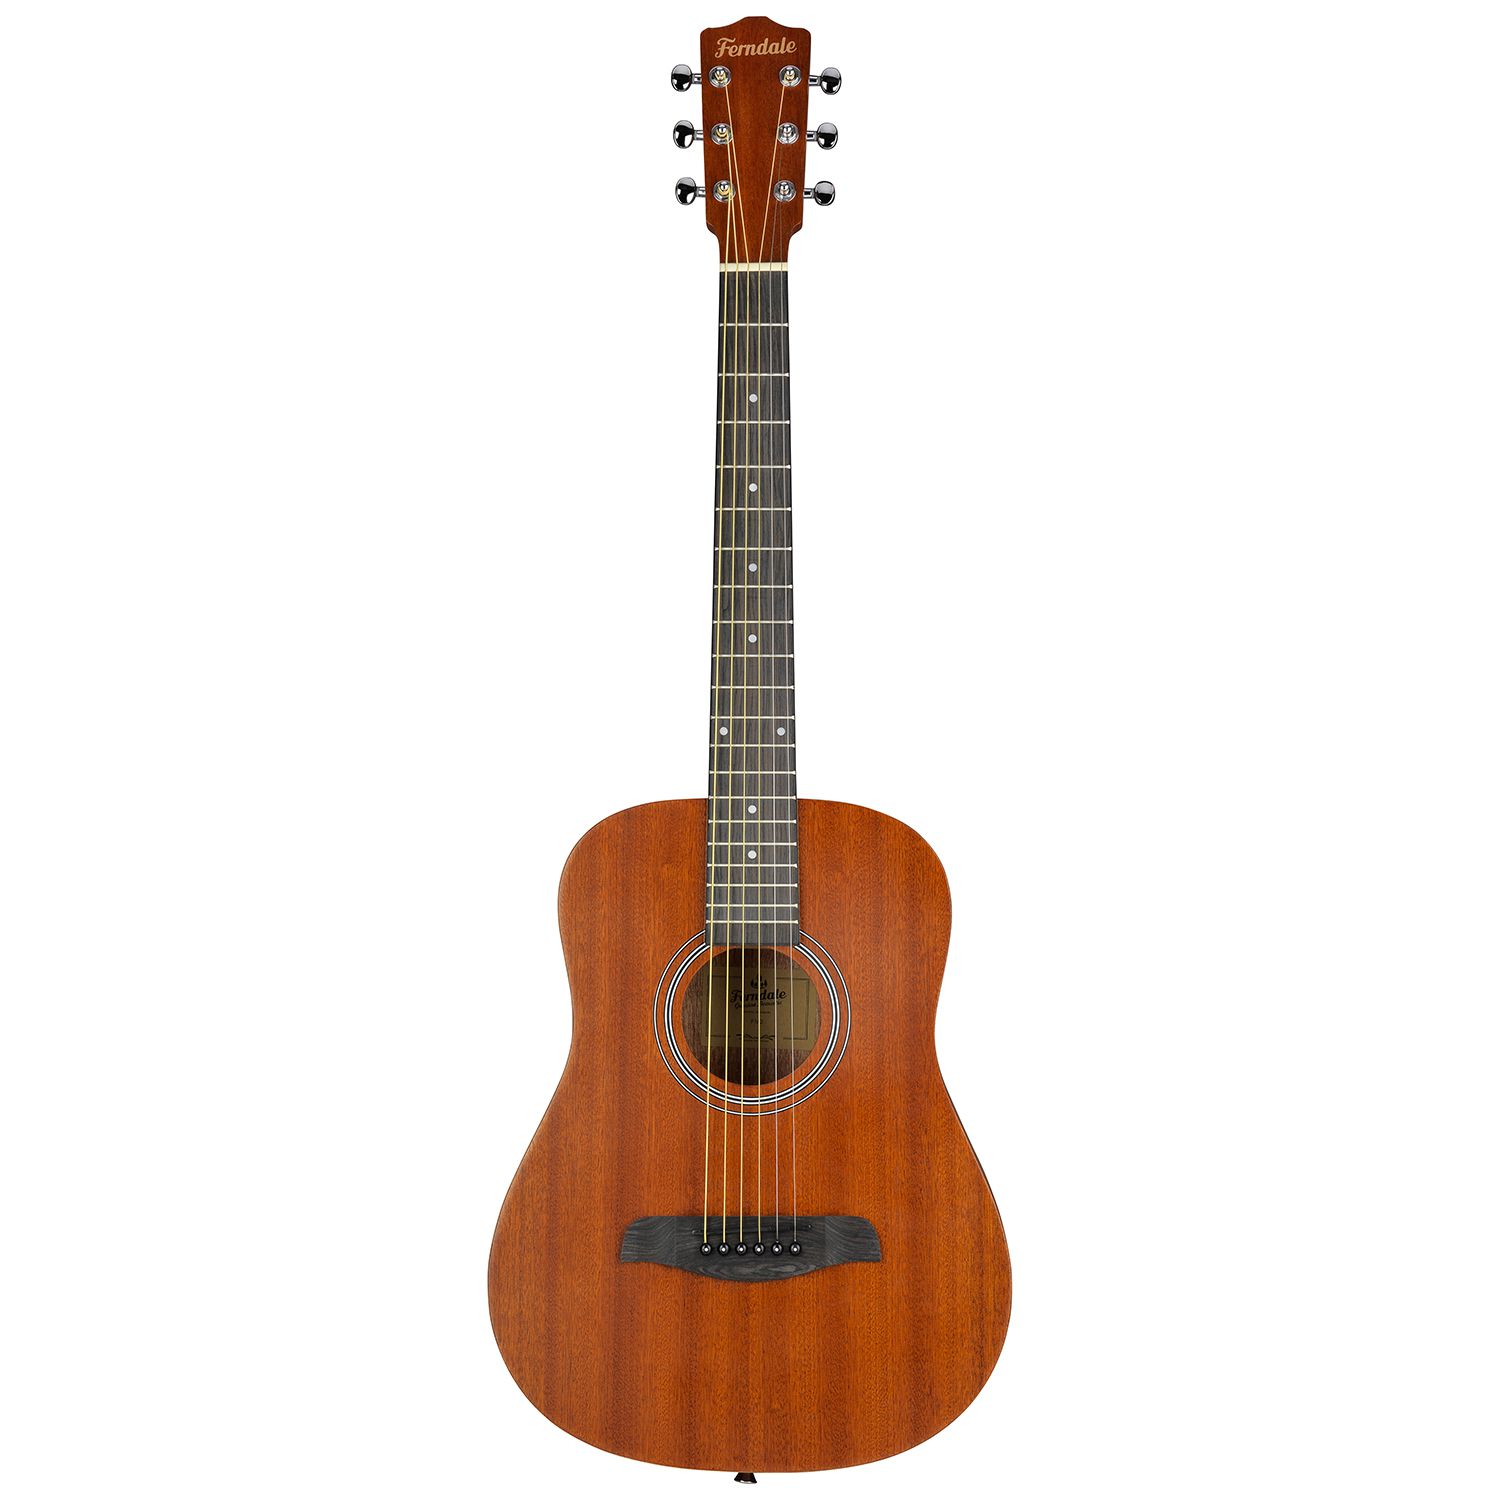 An image of Ferndale M2 Travel Guitar, Mahogany | PMT Online